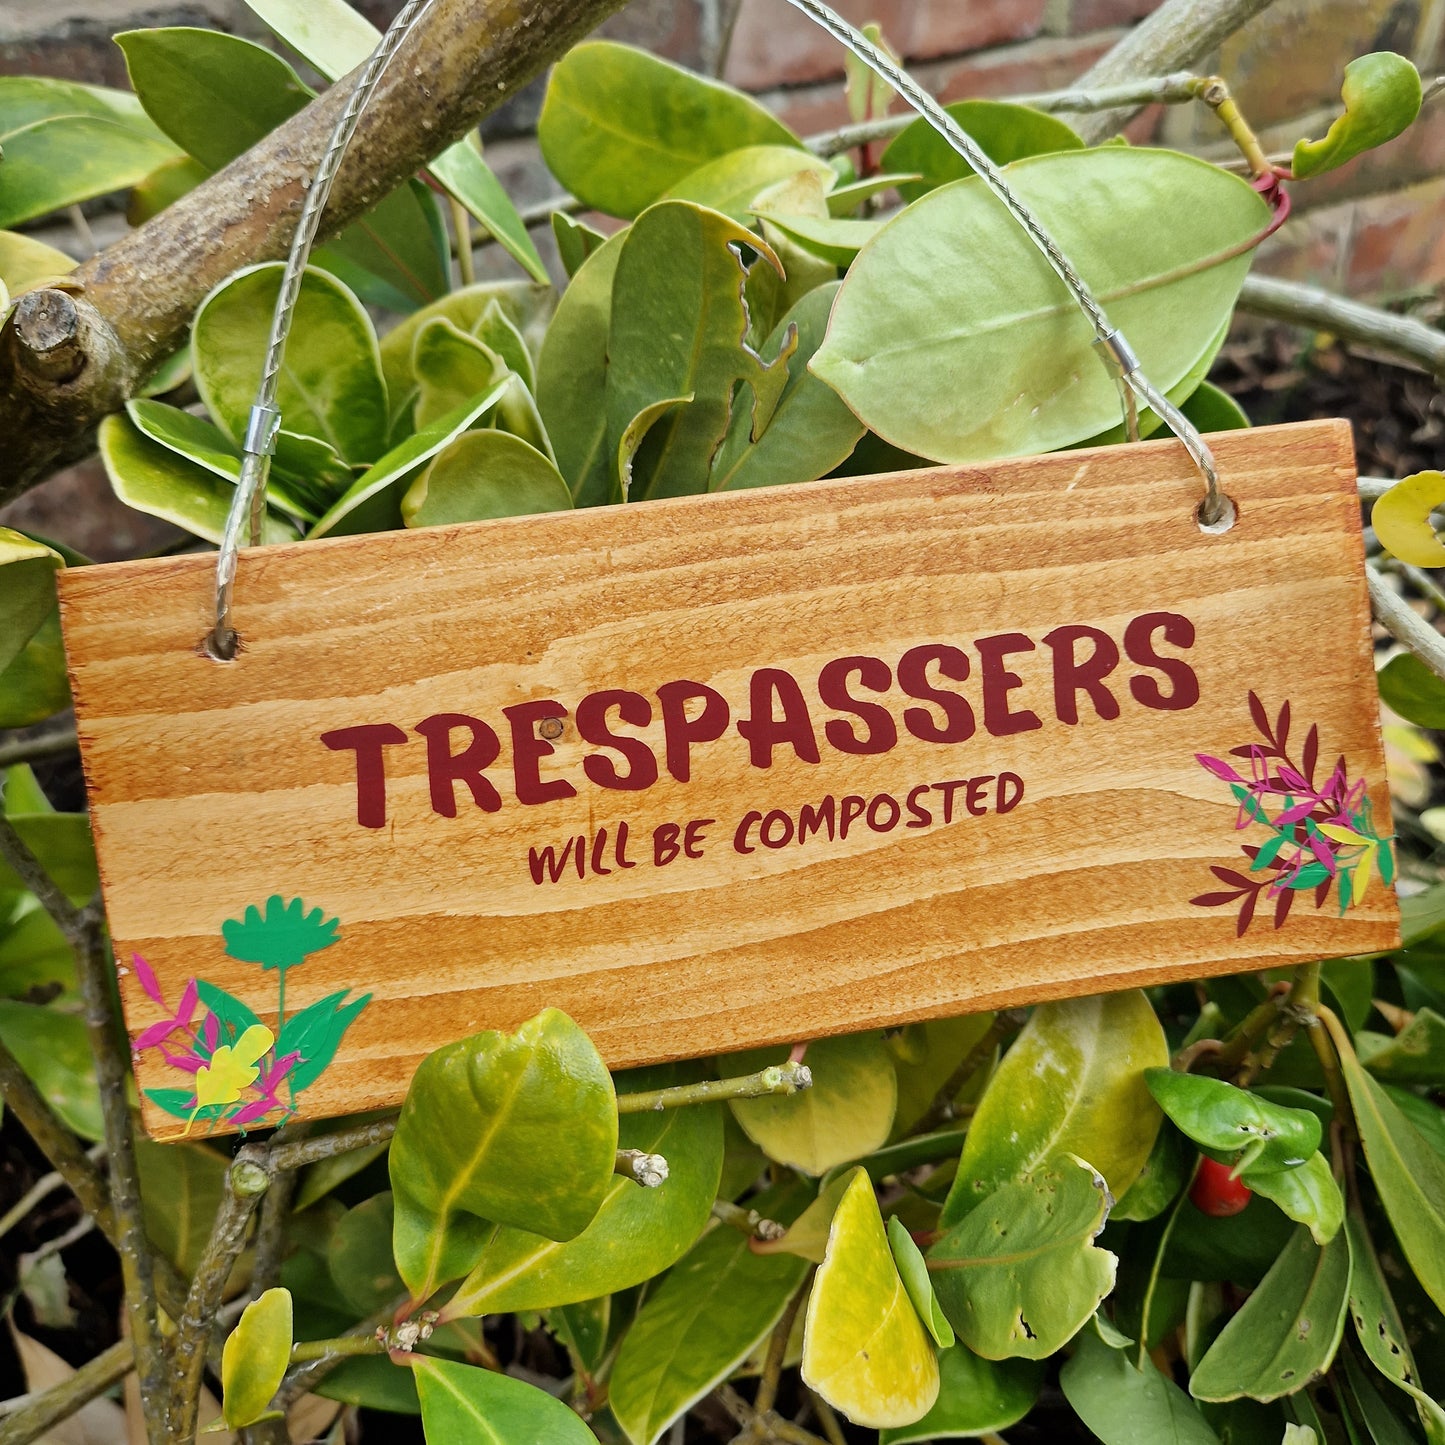 trespassers will be composted outdoor garden decoration, funny garden signs uk, small garden gifts